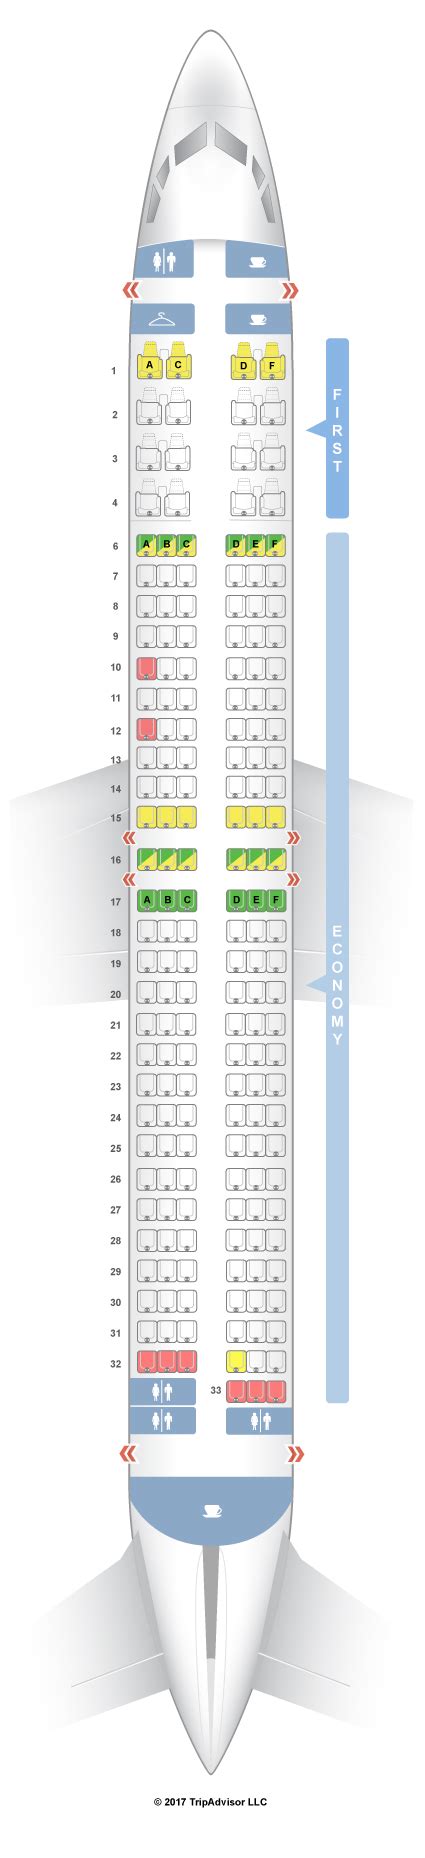 For your next Alaska Airlines flight, use this seating chart to get the most comfortable seats, legroom, and recline on . Seat Maps; Airlines; Cheap Flights ... Boeing 737-700 (737) Boeing 737-800 (738) Boeing 737-900 (739) Bombardier Q400; Embraer 175 (E75) Check-in;. 